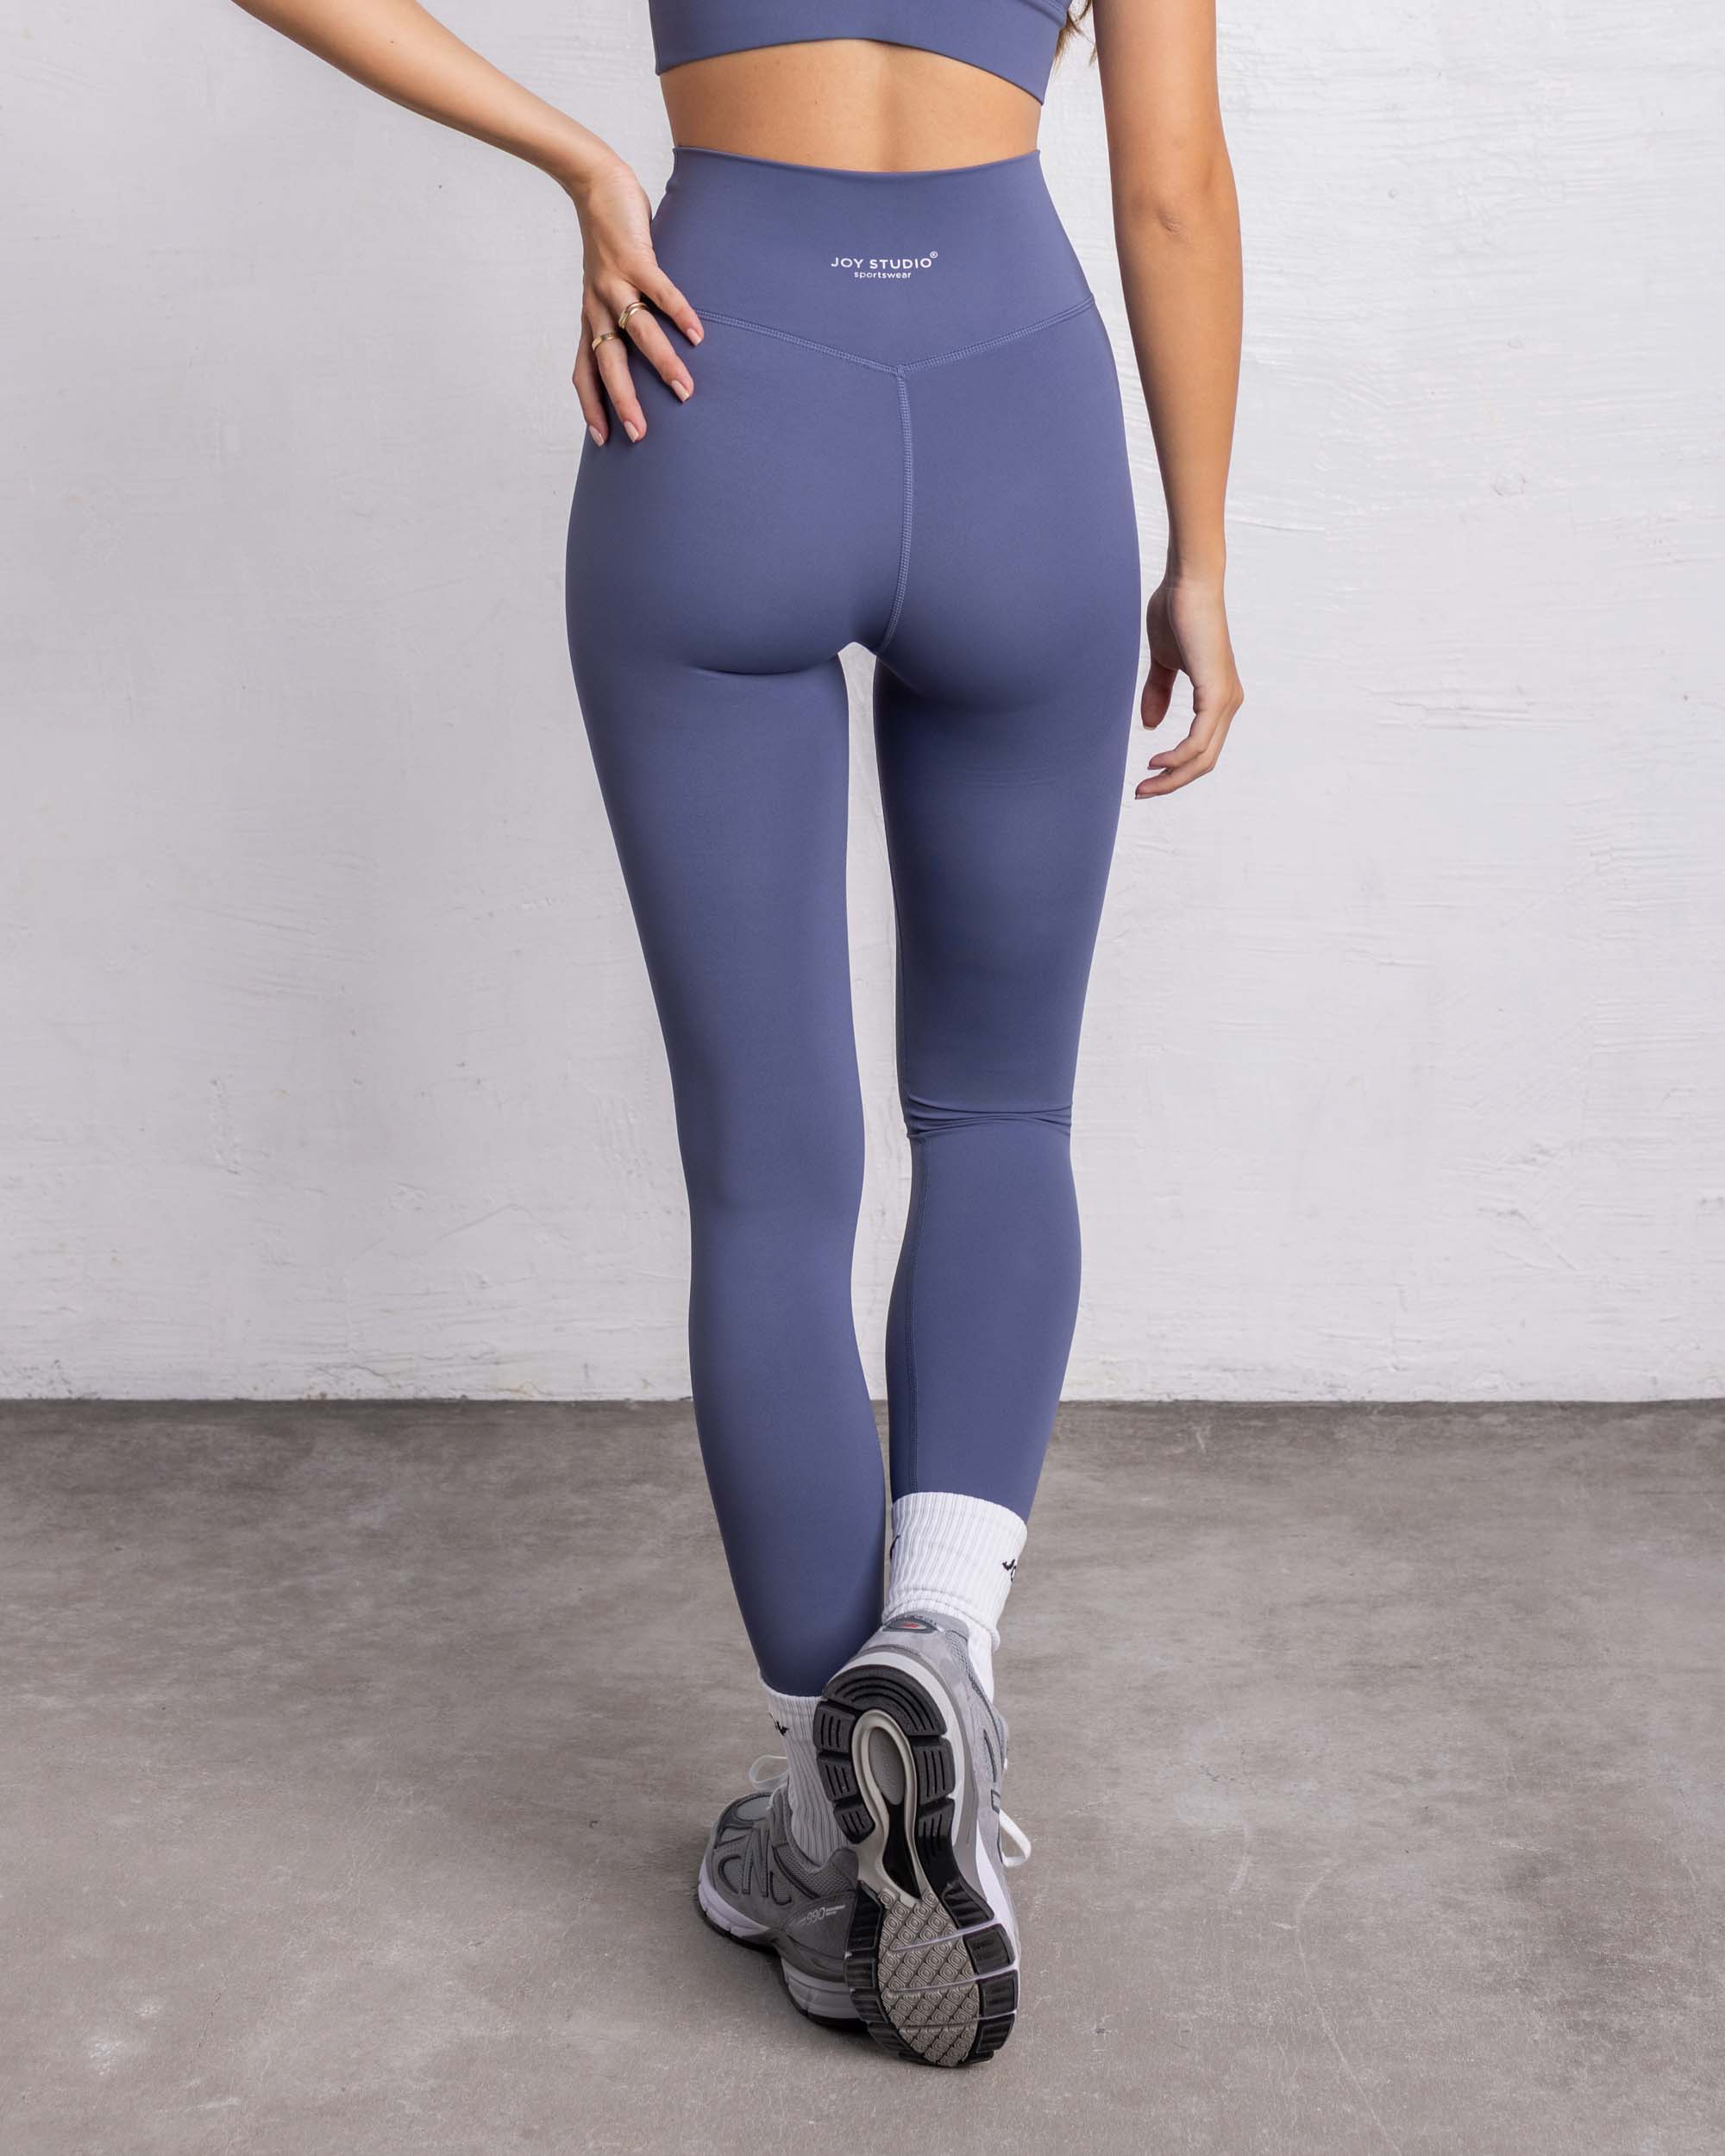 Abstract Capri leggings, Workout Pants 'Multi-Directional' - Sincerely Joy